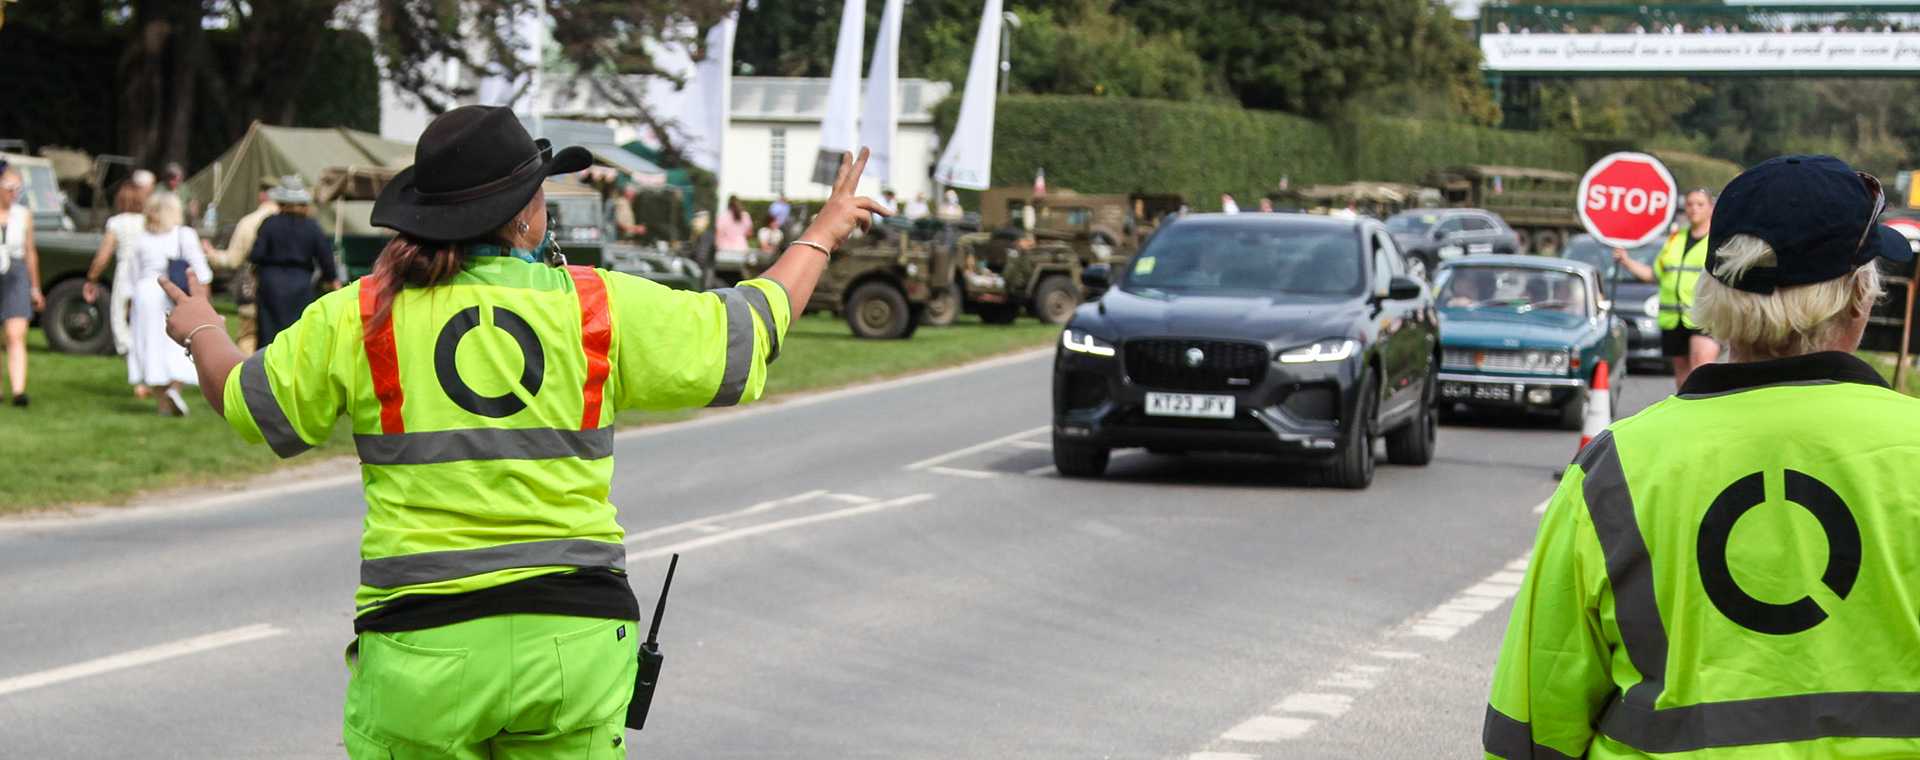 Tracsis Events Marshals directing traffic